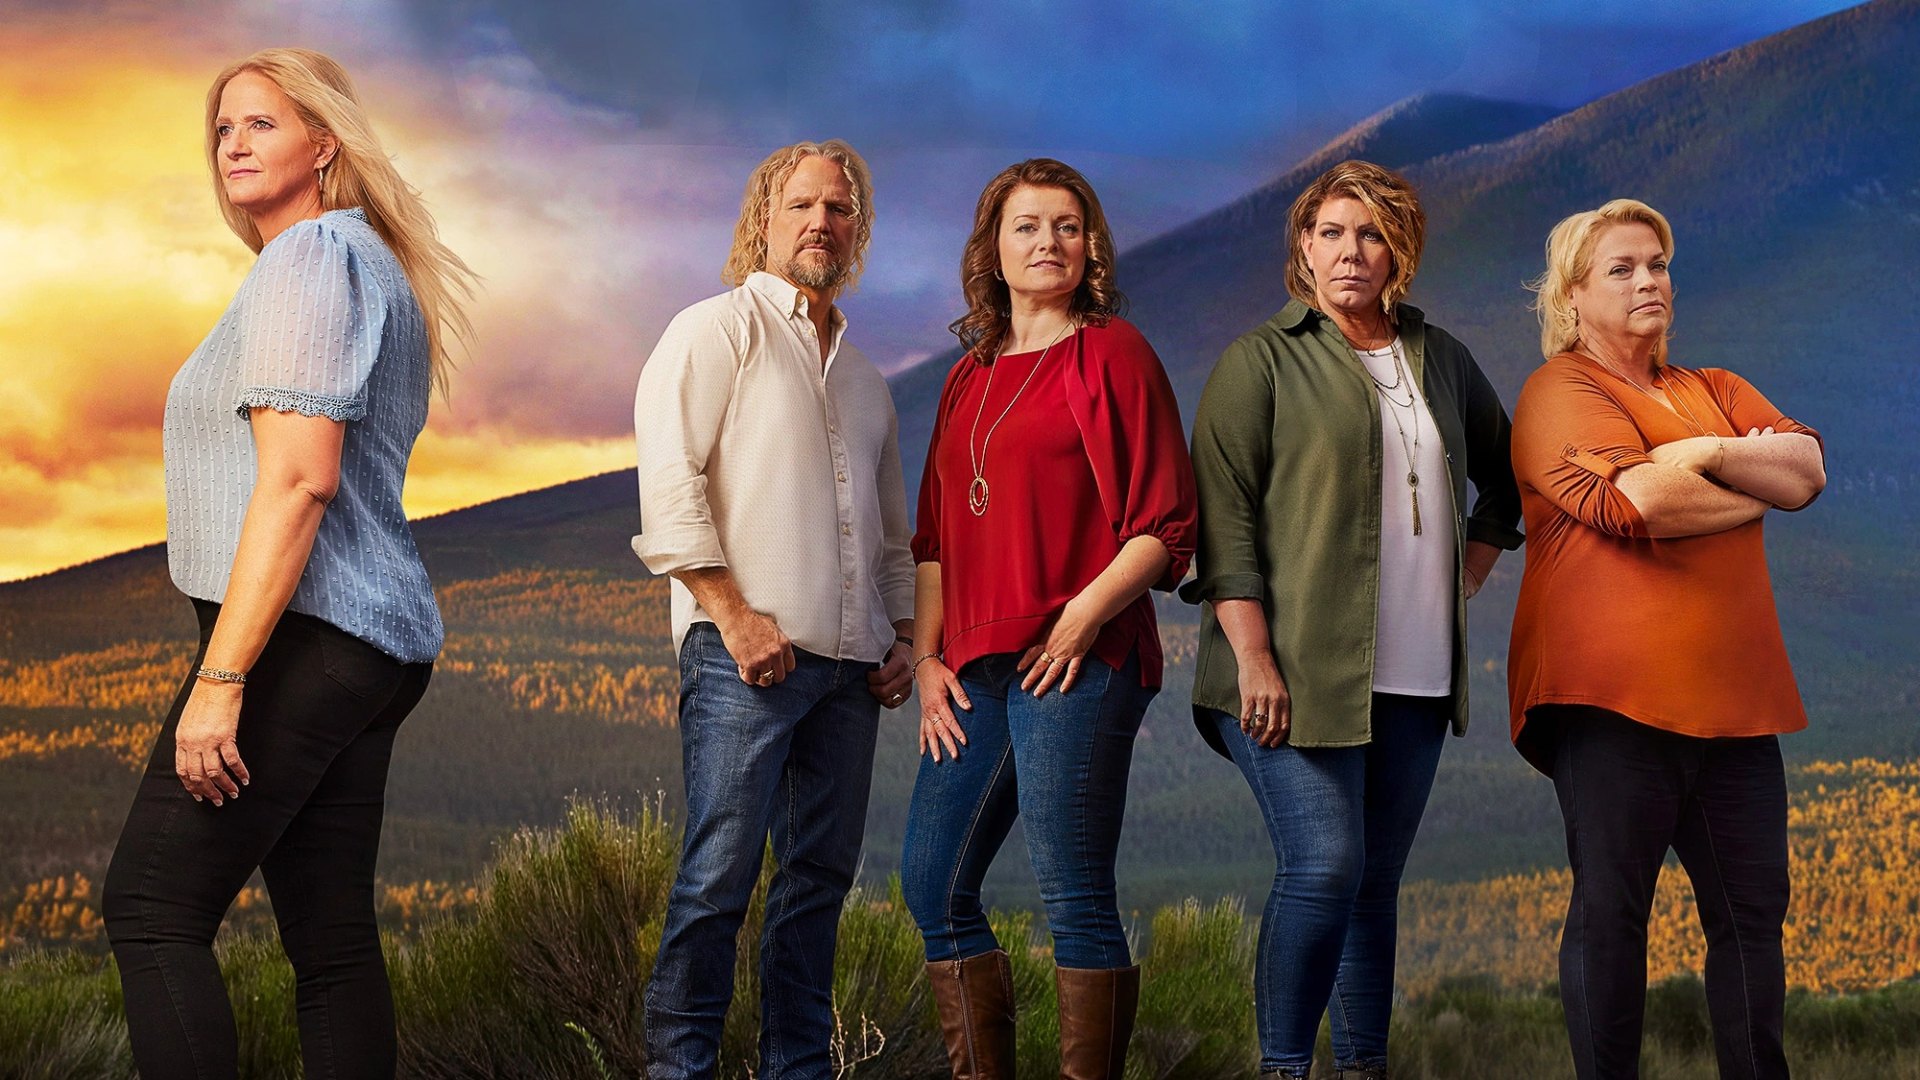 ‘Sister Wives’ Season 18 Premiere Date, Cast, More Details In Touch